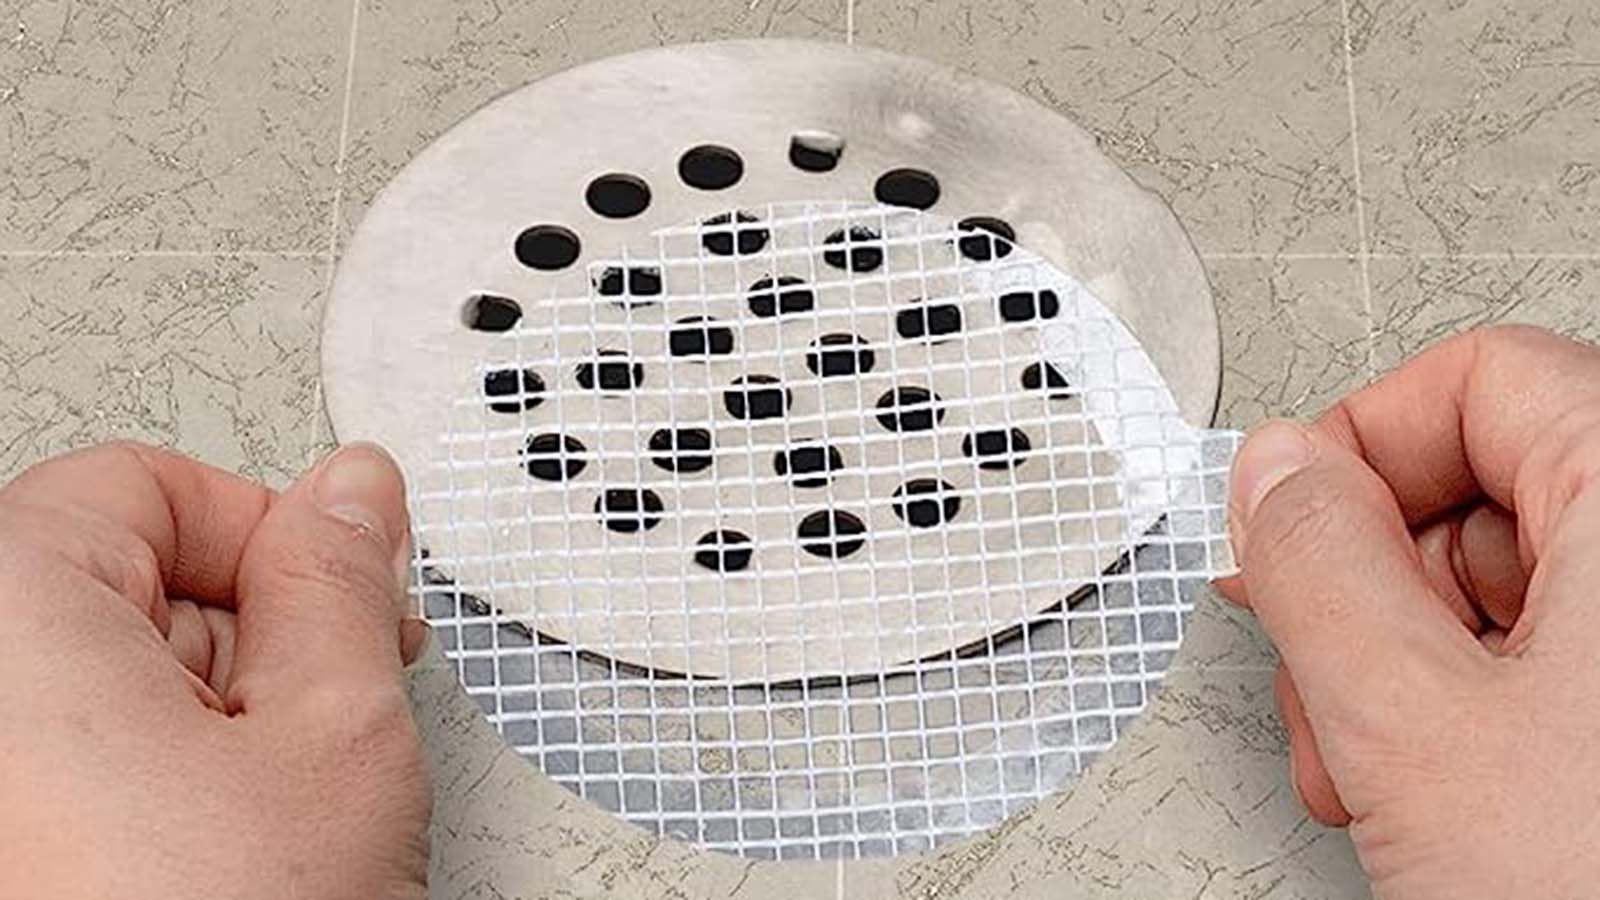 This $9 Shower Drain Cover Prevents Hair Clogs Once and for All